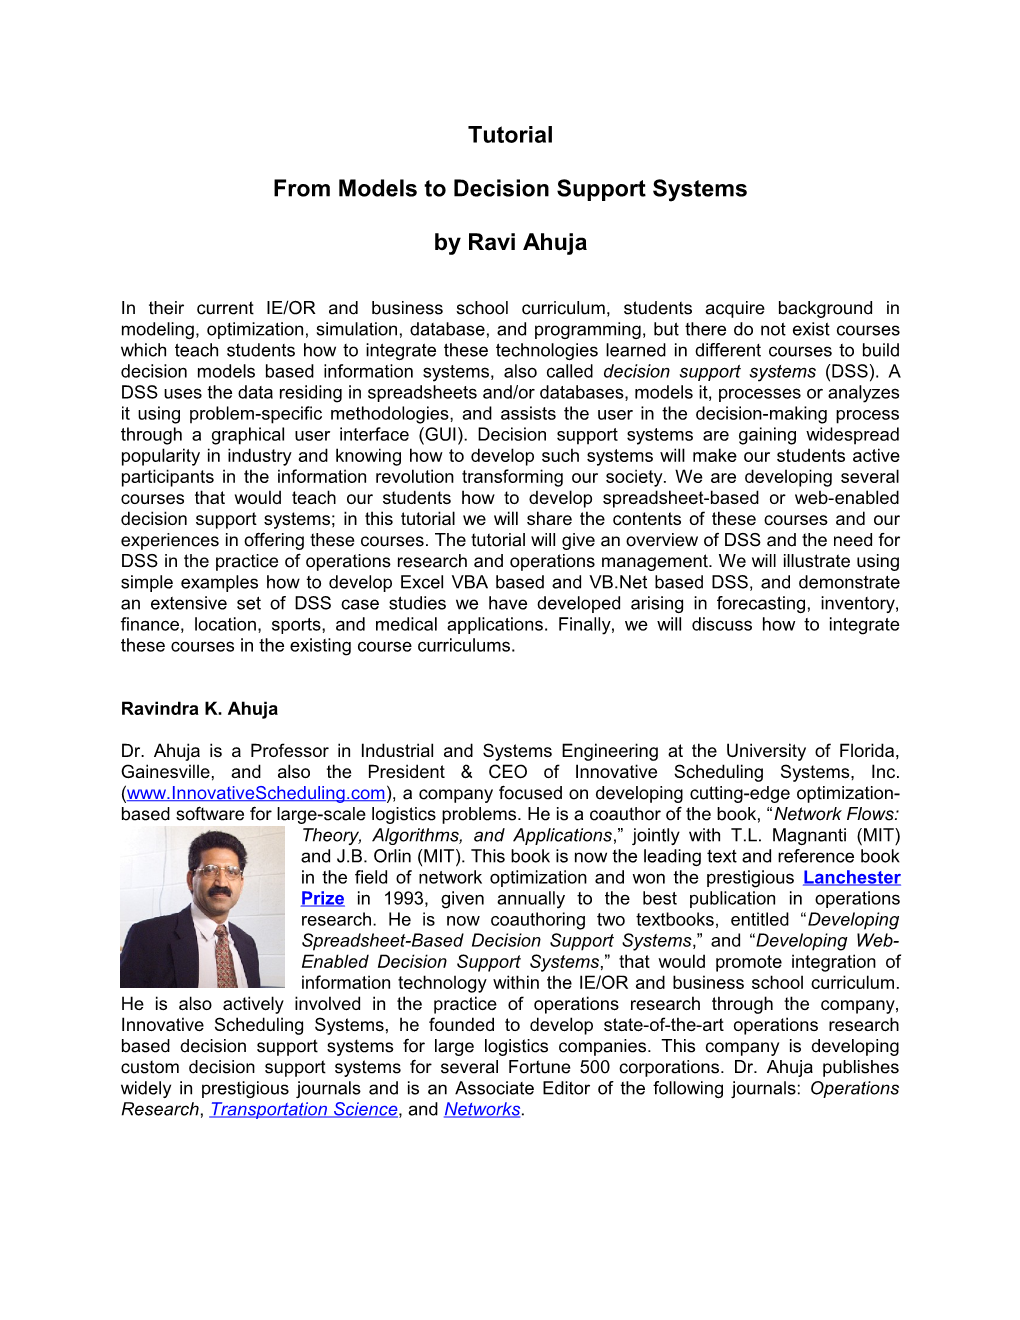 Tutorial: from Models to Decision Support Systems